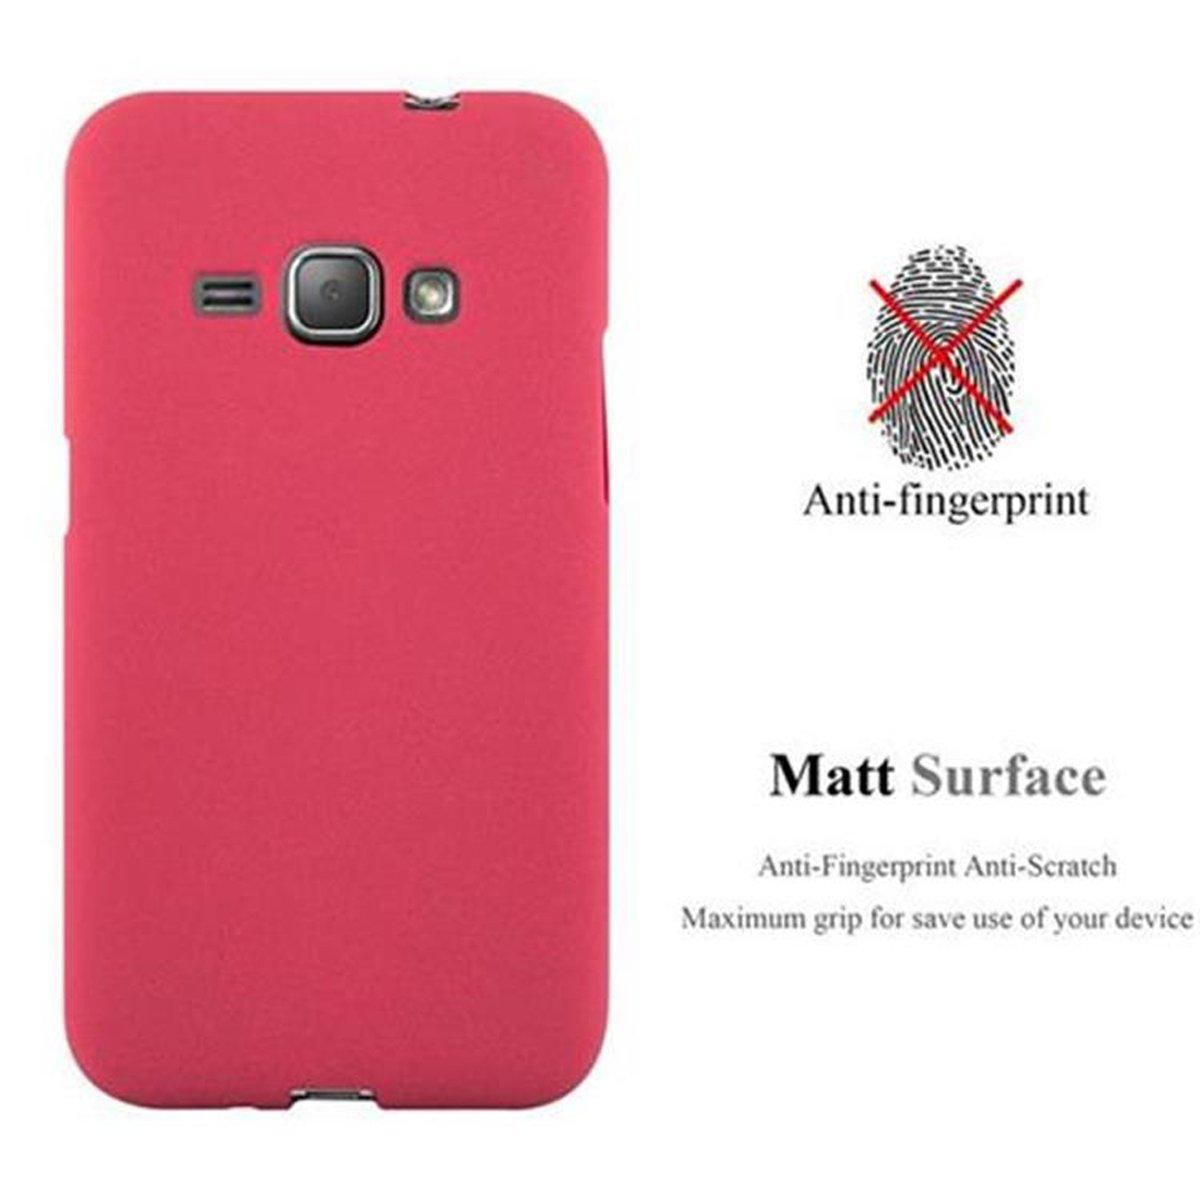 CADORABO TPU Frosted 2016, J1 Samsung, Galaxy Backcover, ROT Schutzhülle, FROST